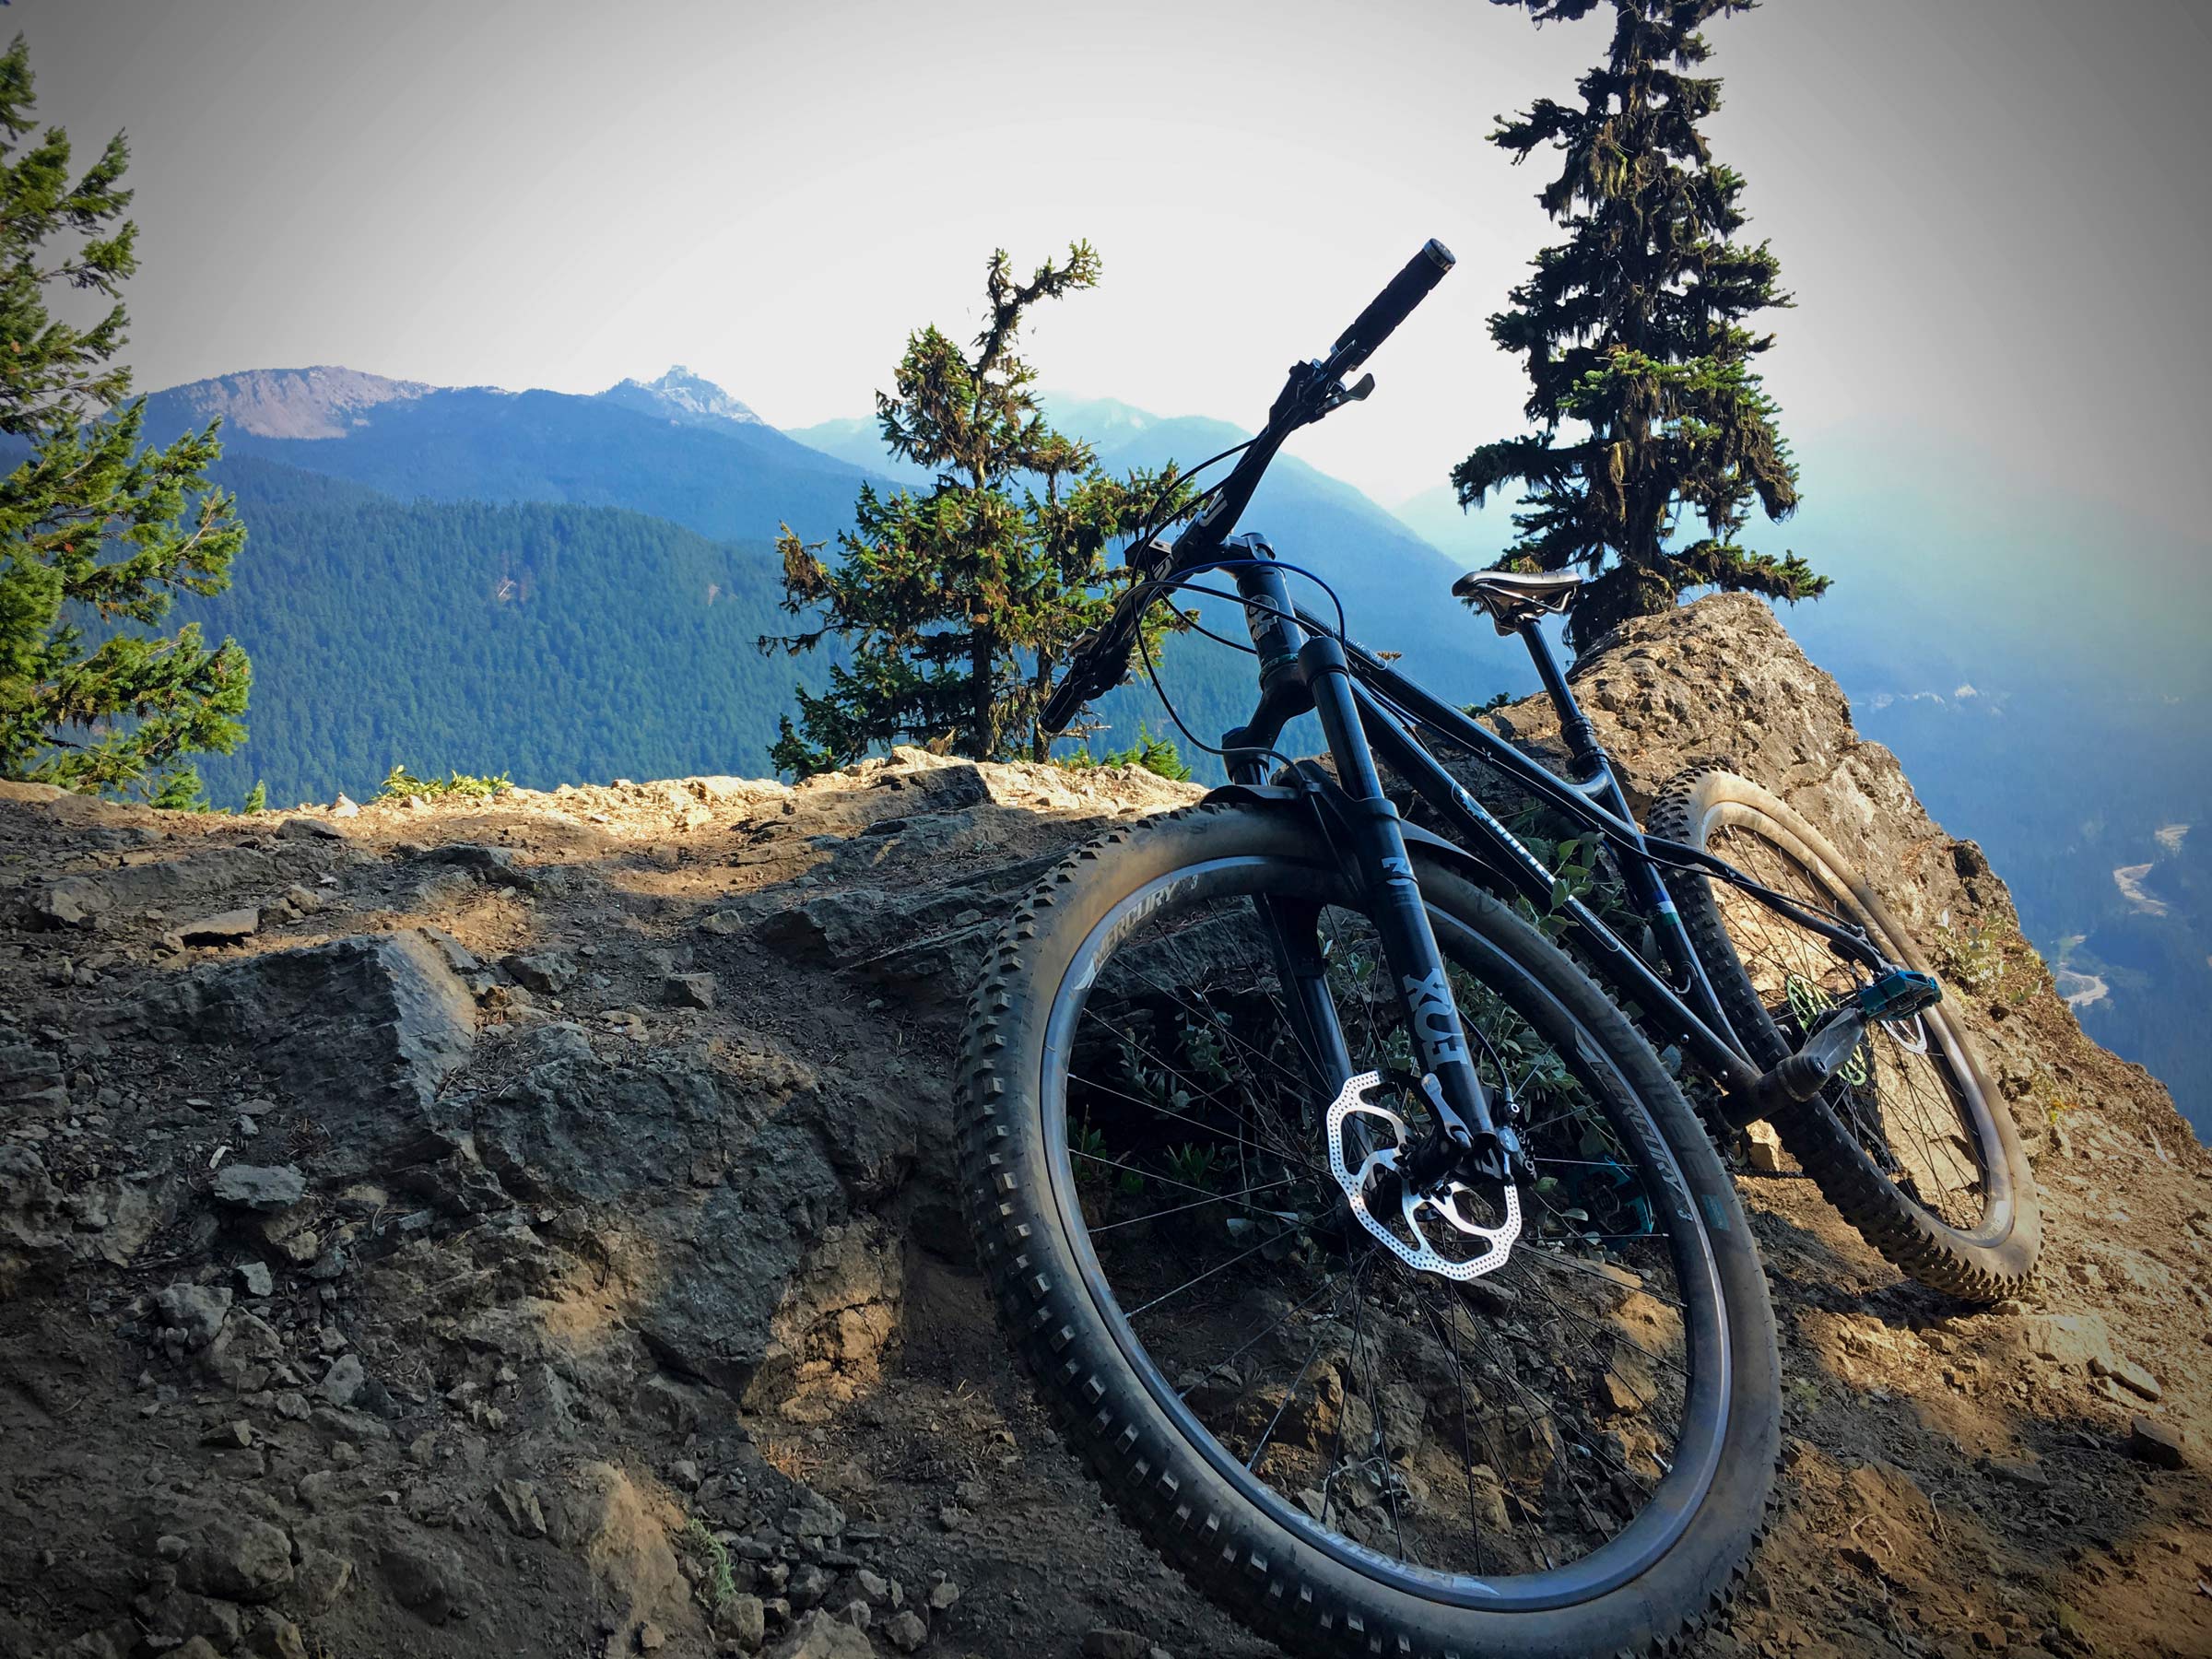 Bikerumor Pic Of The Day: Palisades Trail outside of Olympia, WA